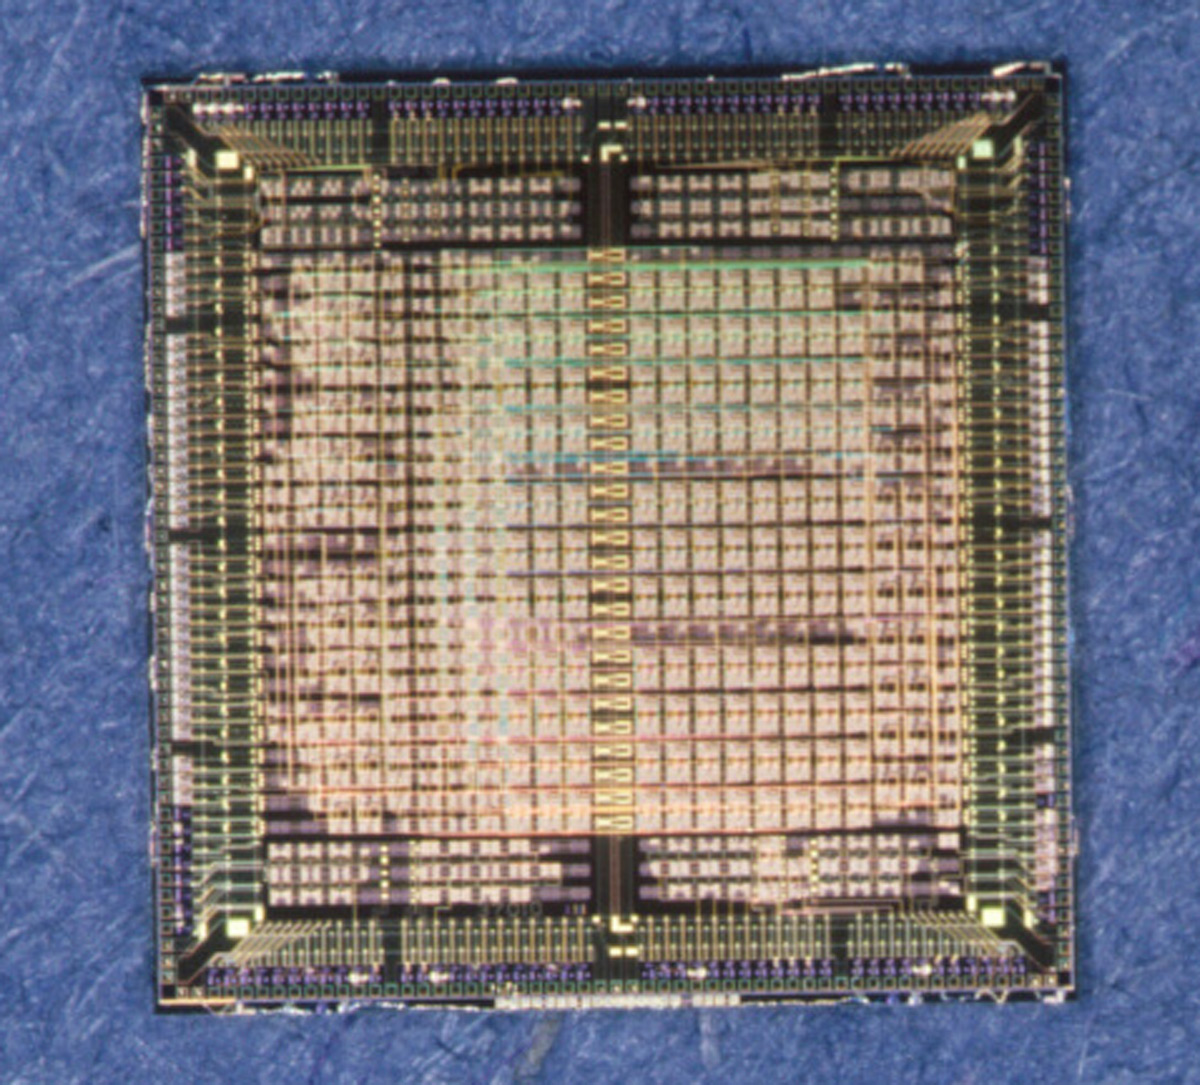 Historical SPPDG Image - Mayo designed GaAs integrated circuit with 250 MHz clock in 1985